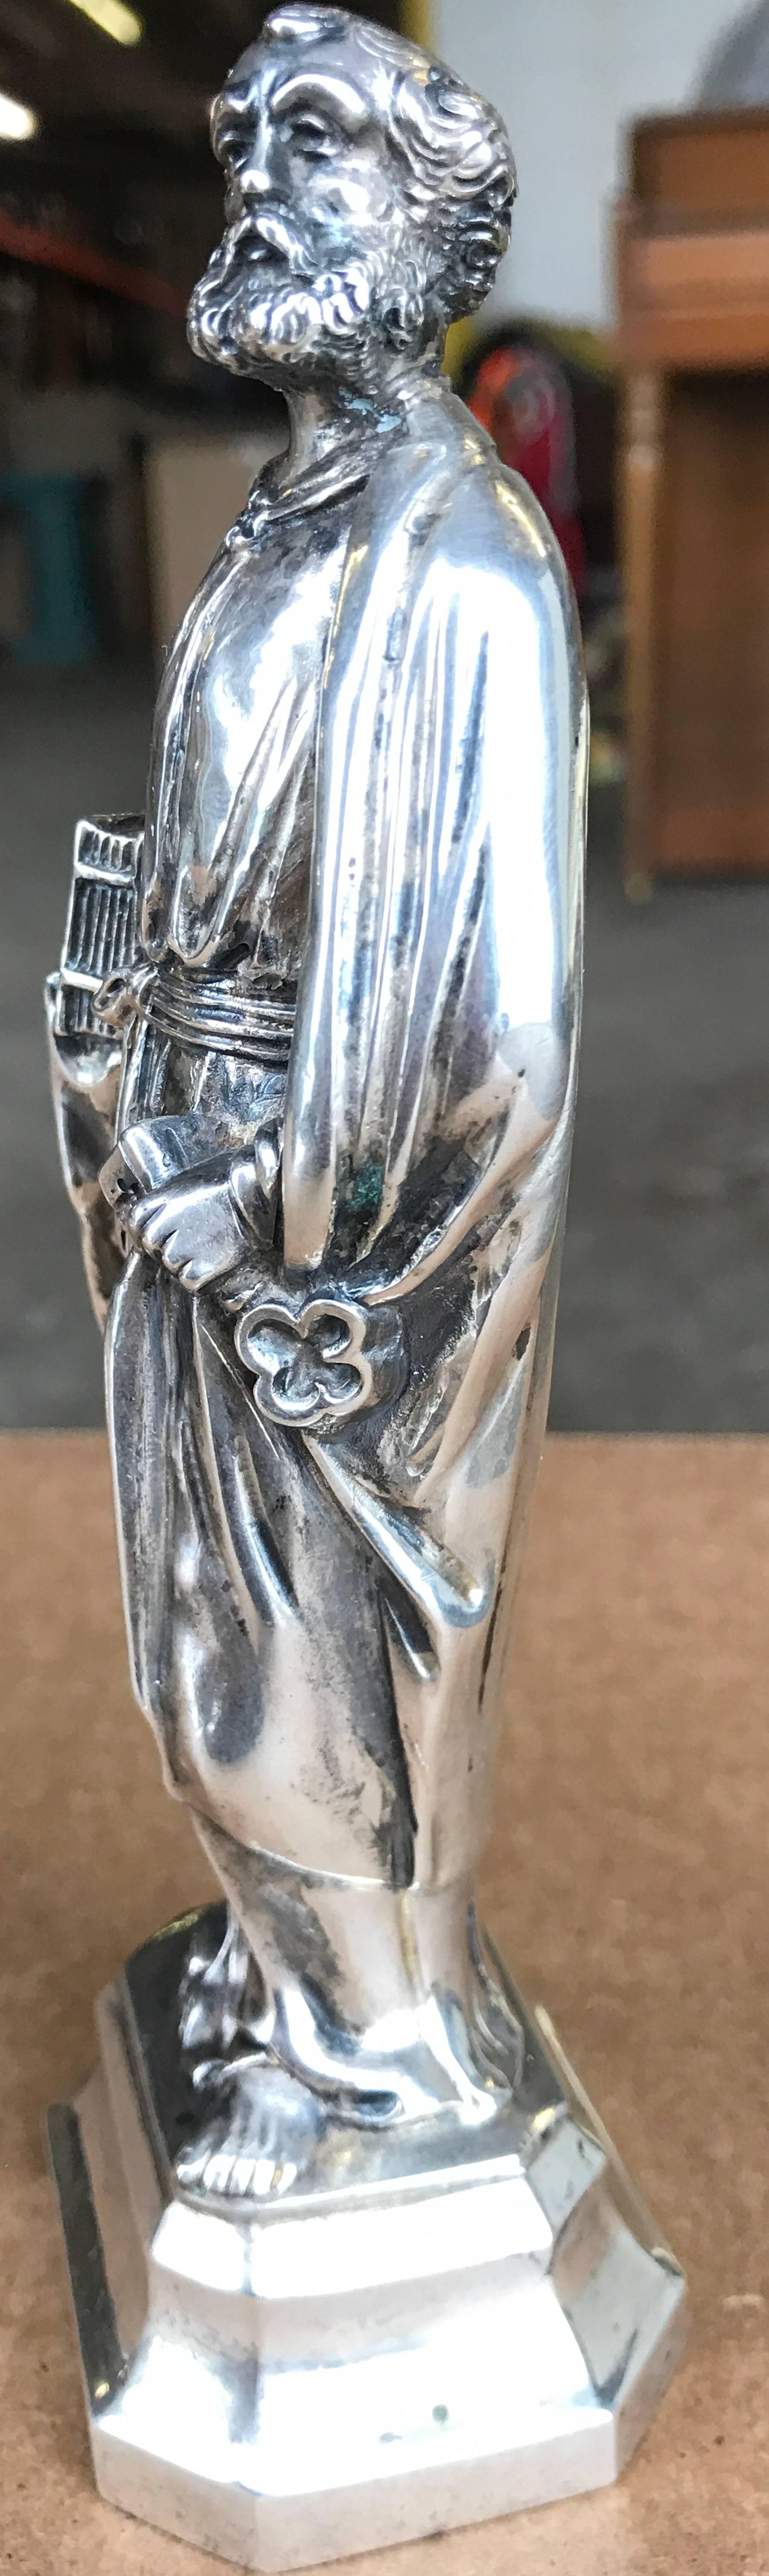 19th Century German Silver Ecclesiastical Figure of Sankt Peter In Good Condition For Sale In West Palm Beach, FL